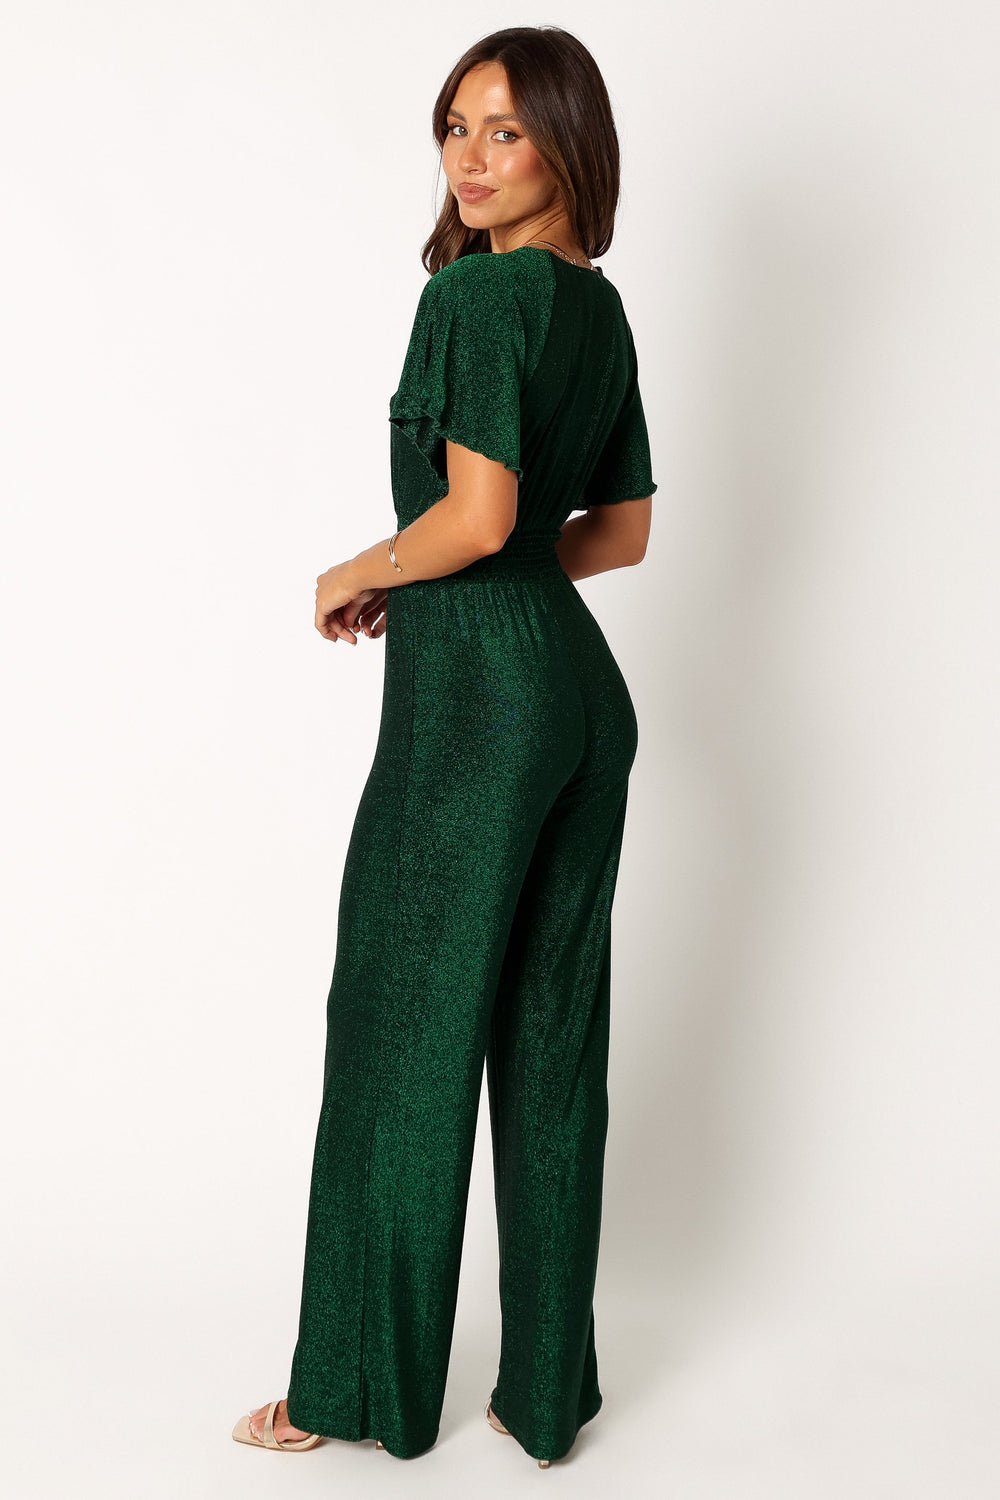 Petal and Pup USA Rompers Laylah Jumpsuit - Emerald